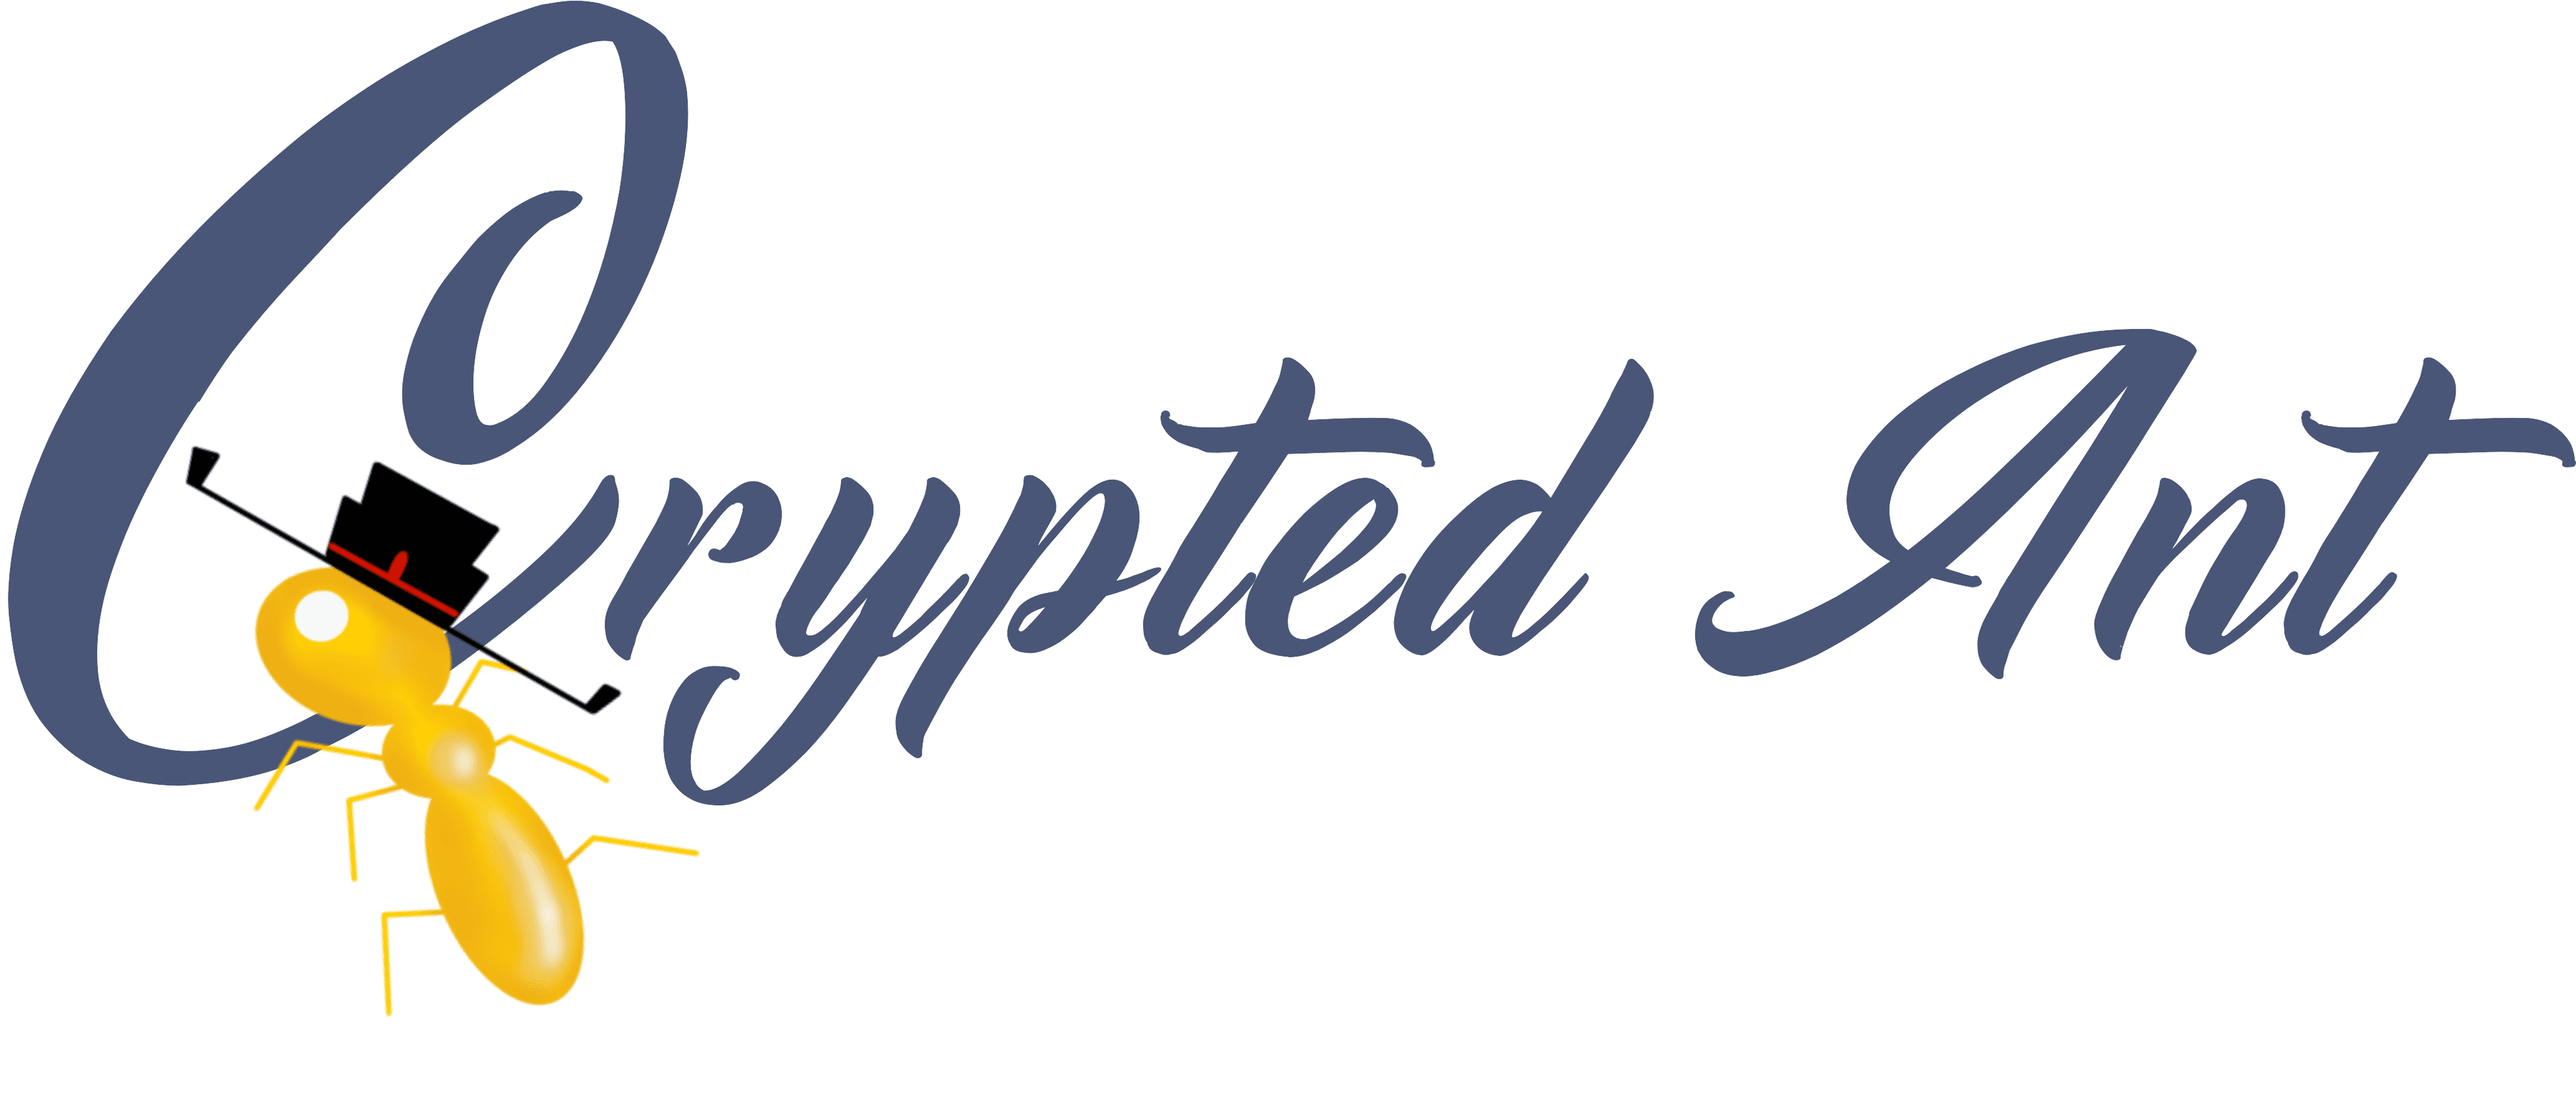 Crypted-Ant banner